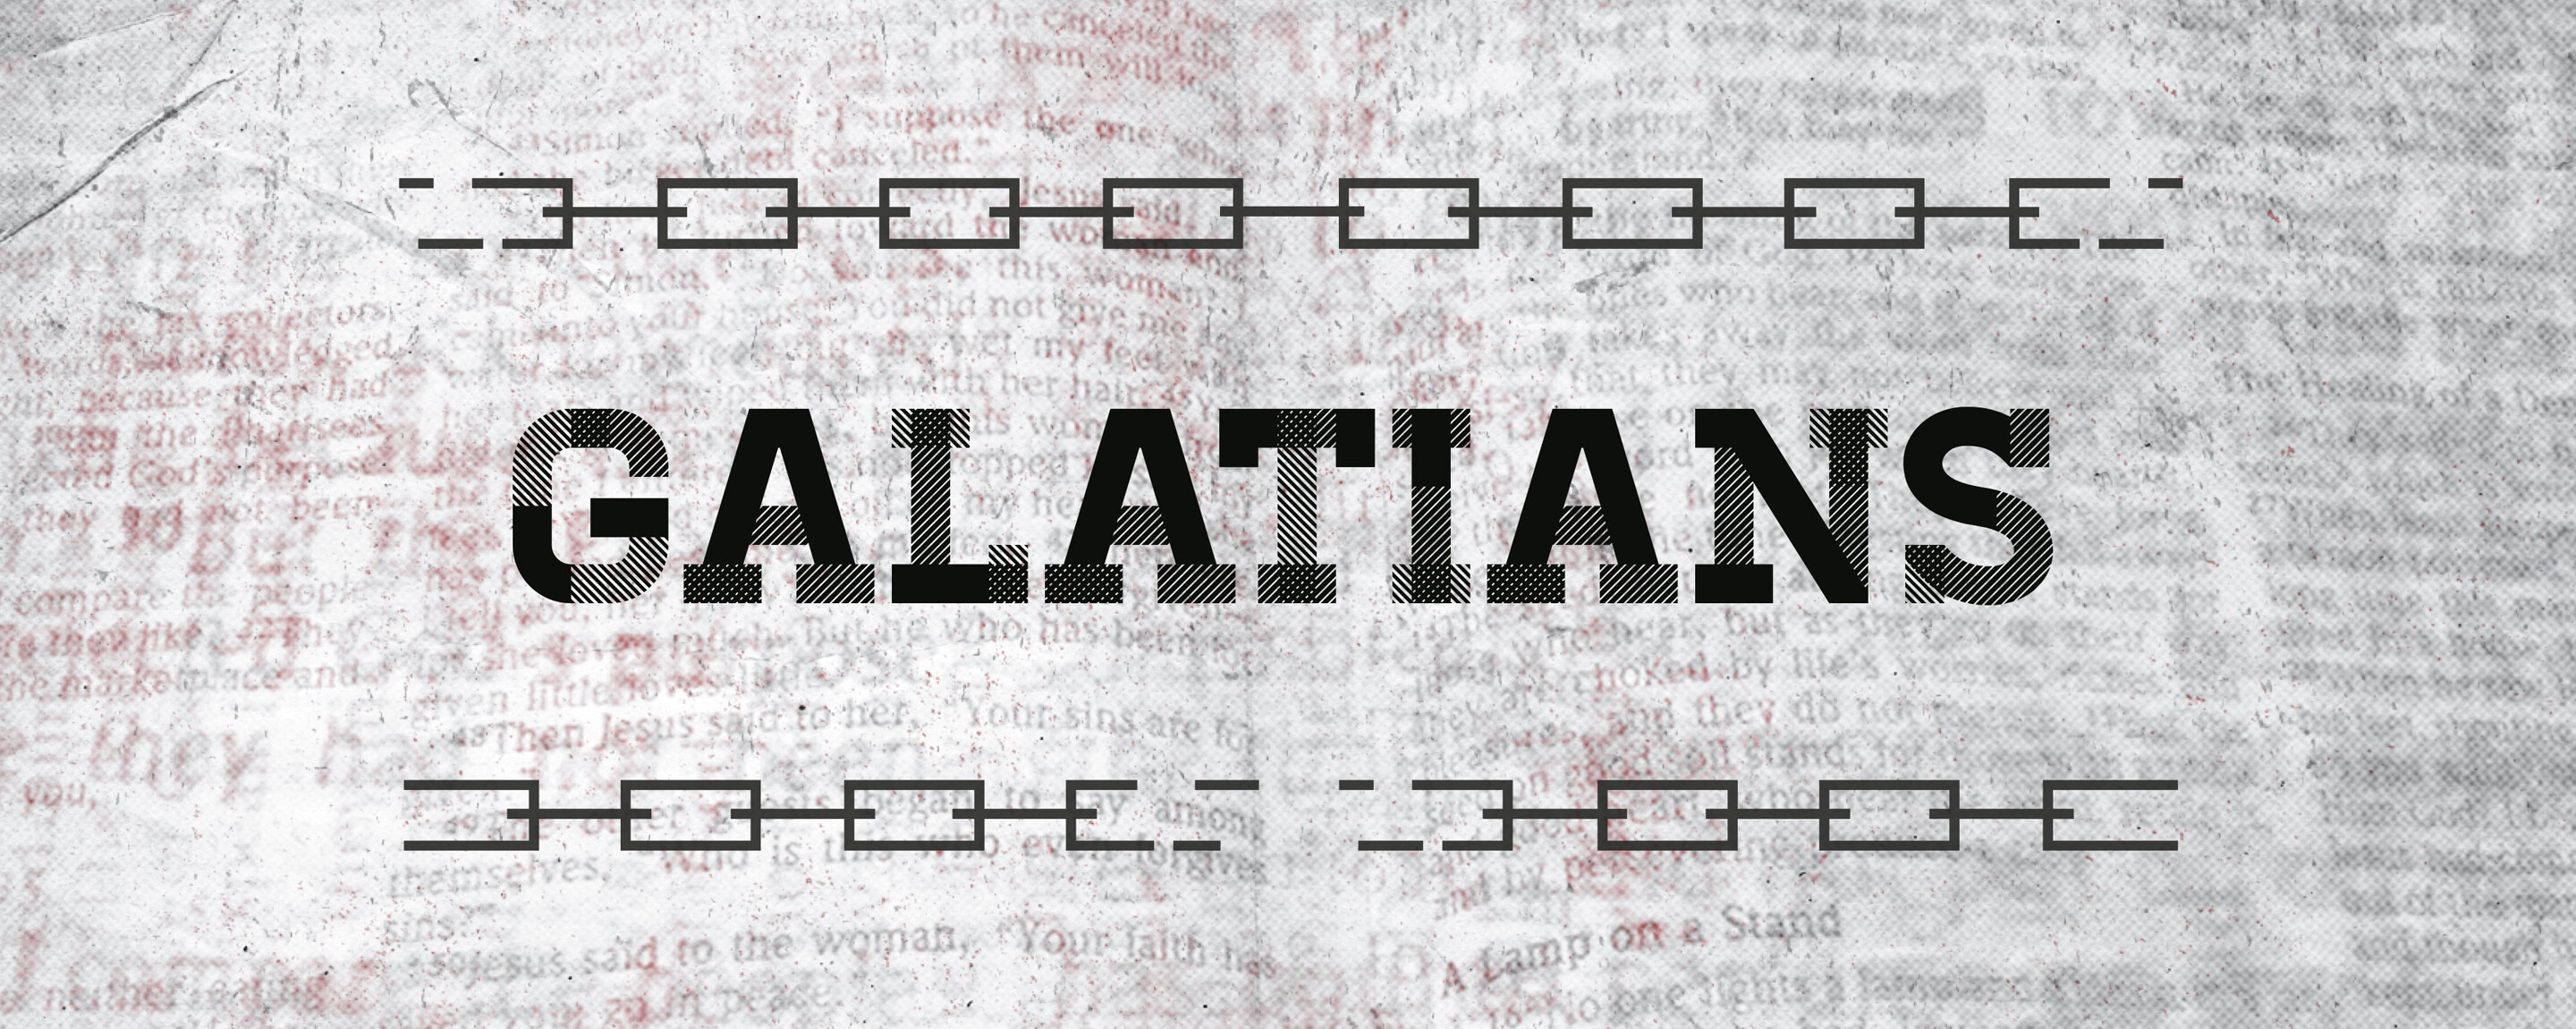 Galatians Pt. 5 | The Truth About You